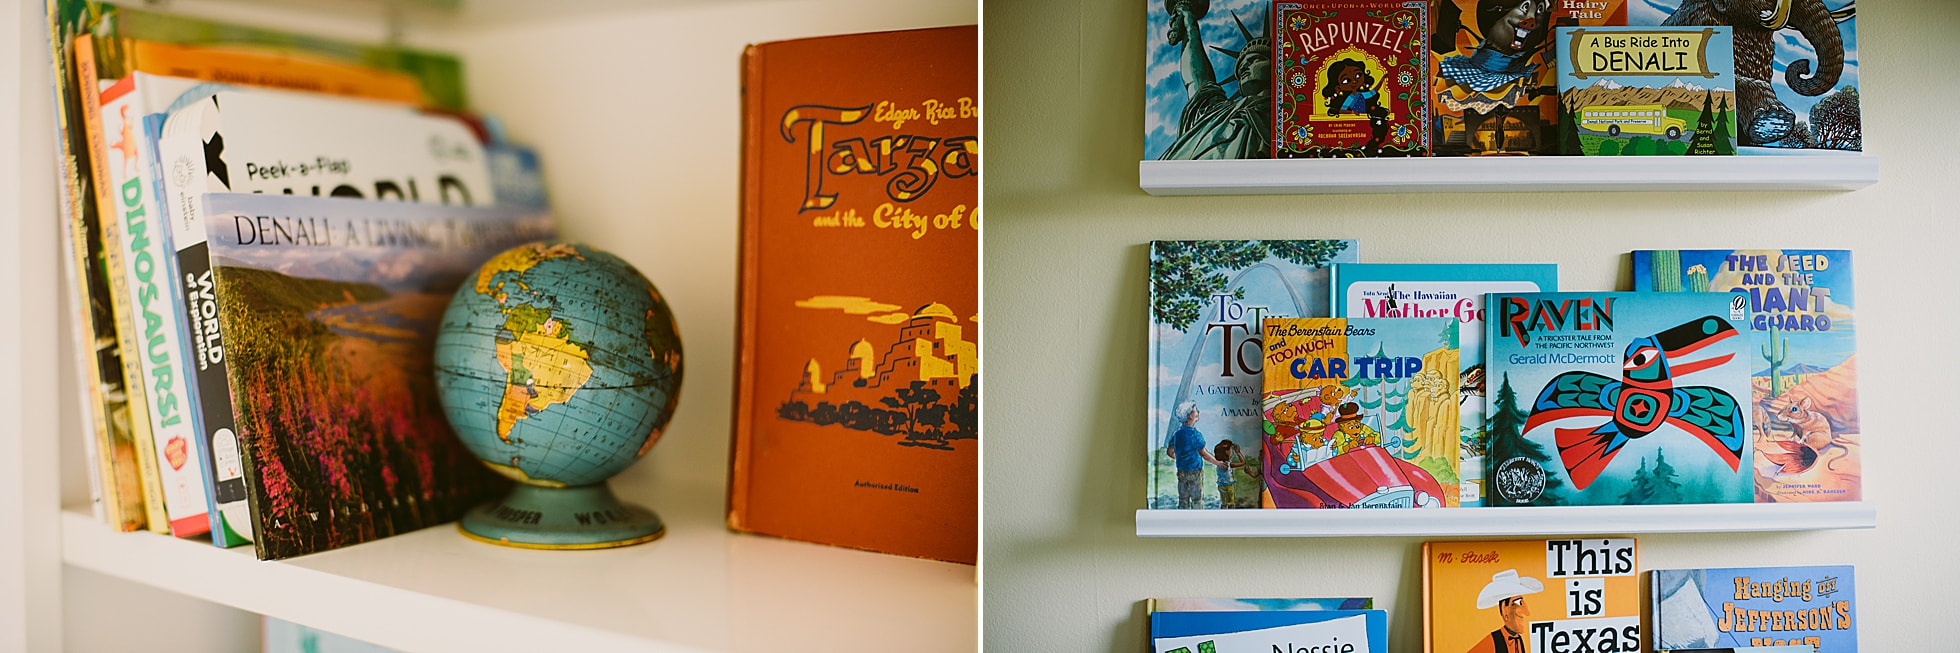 Travel-themed nursery details and books by Laura Richards Photography